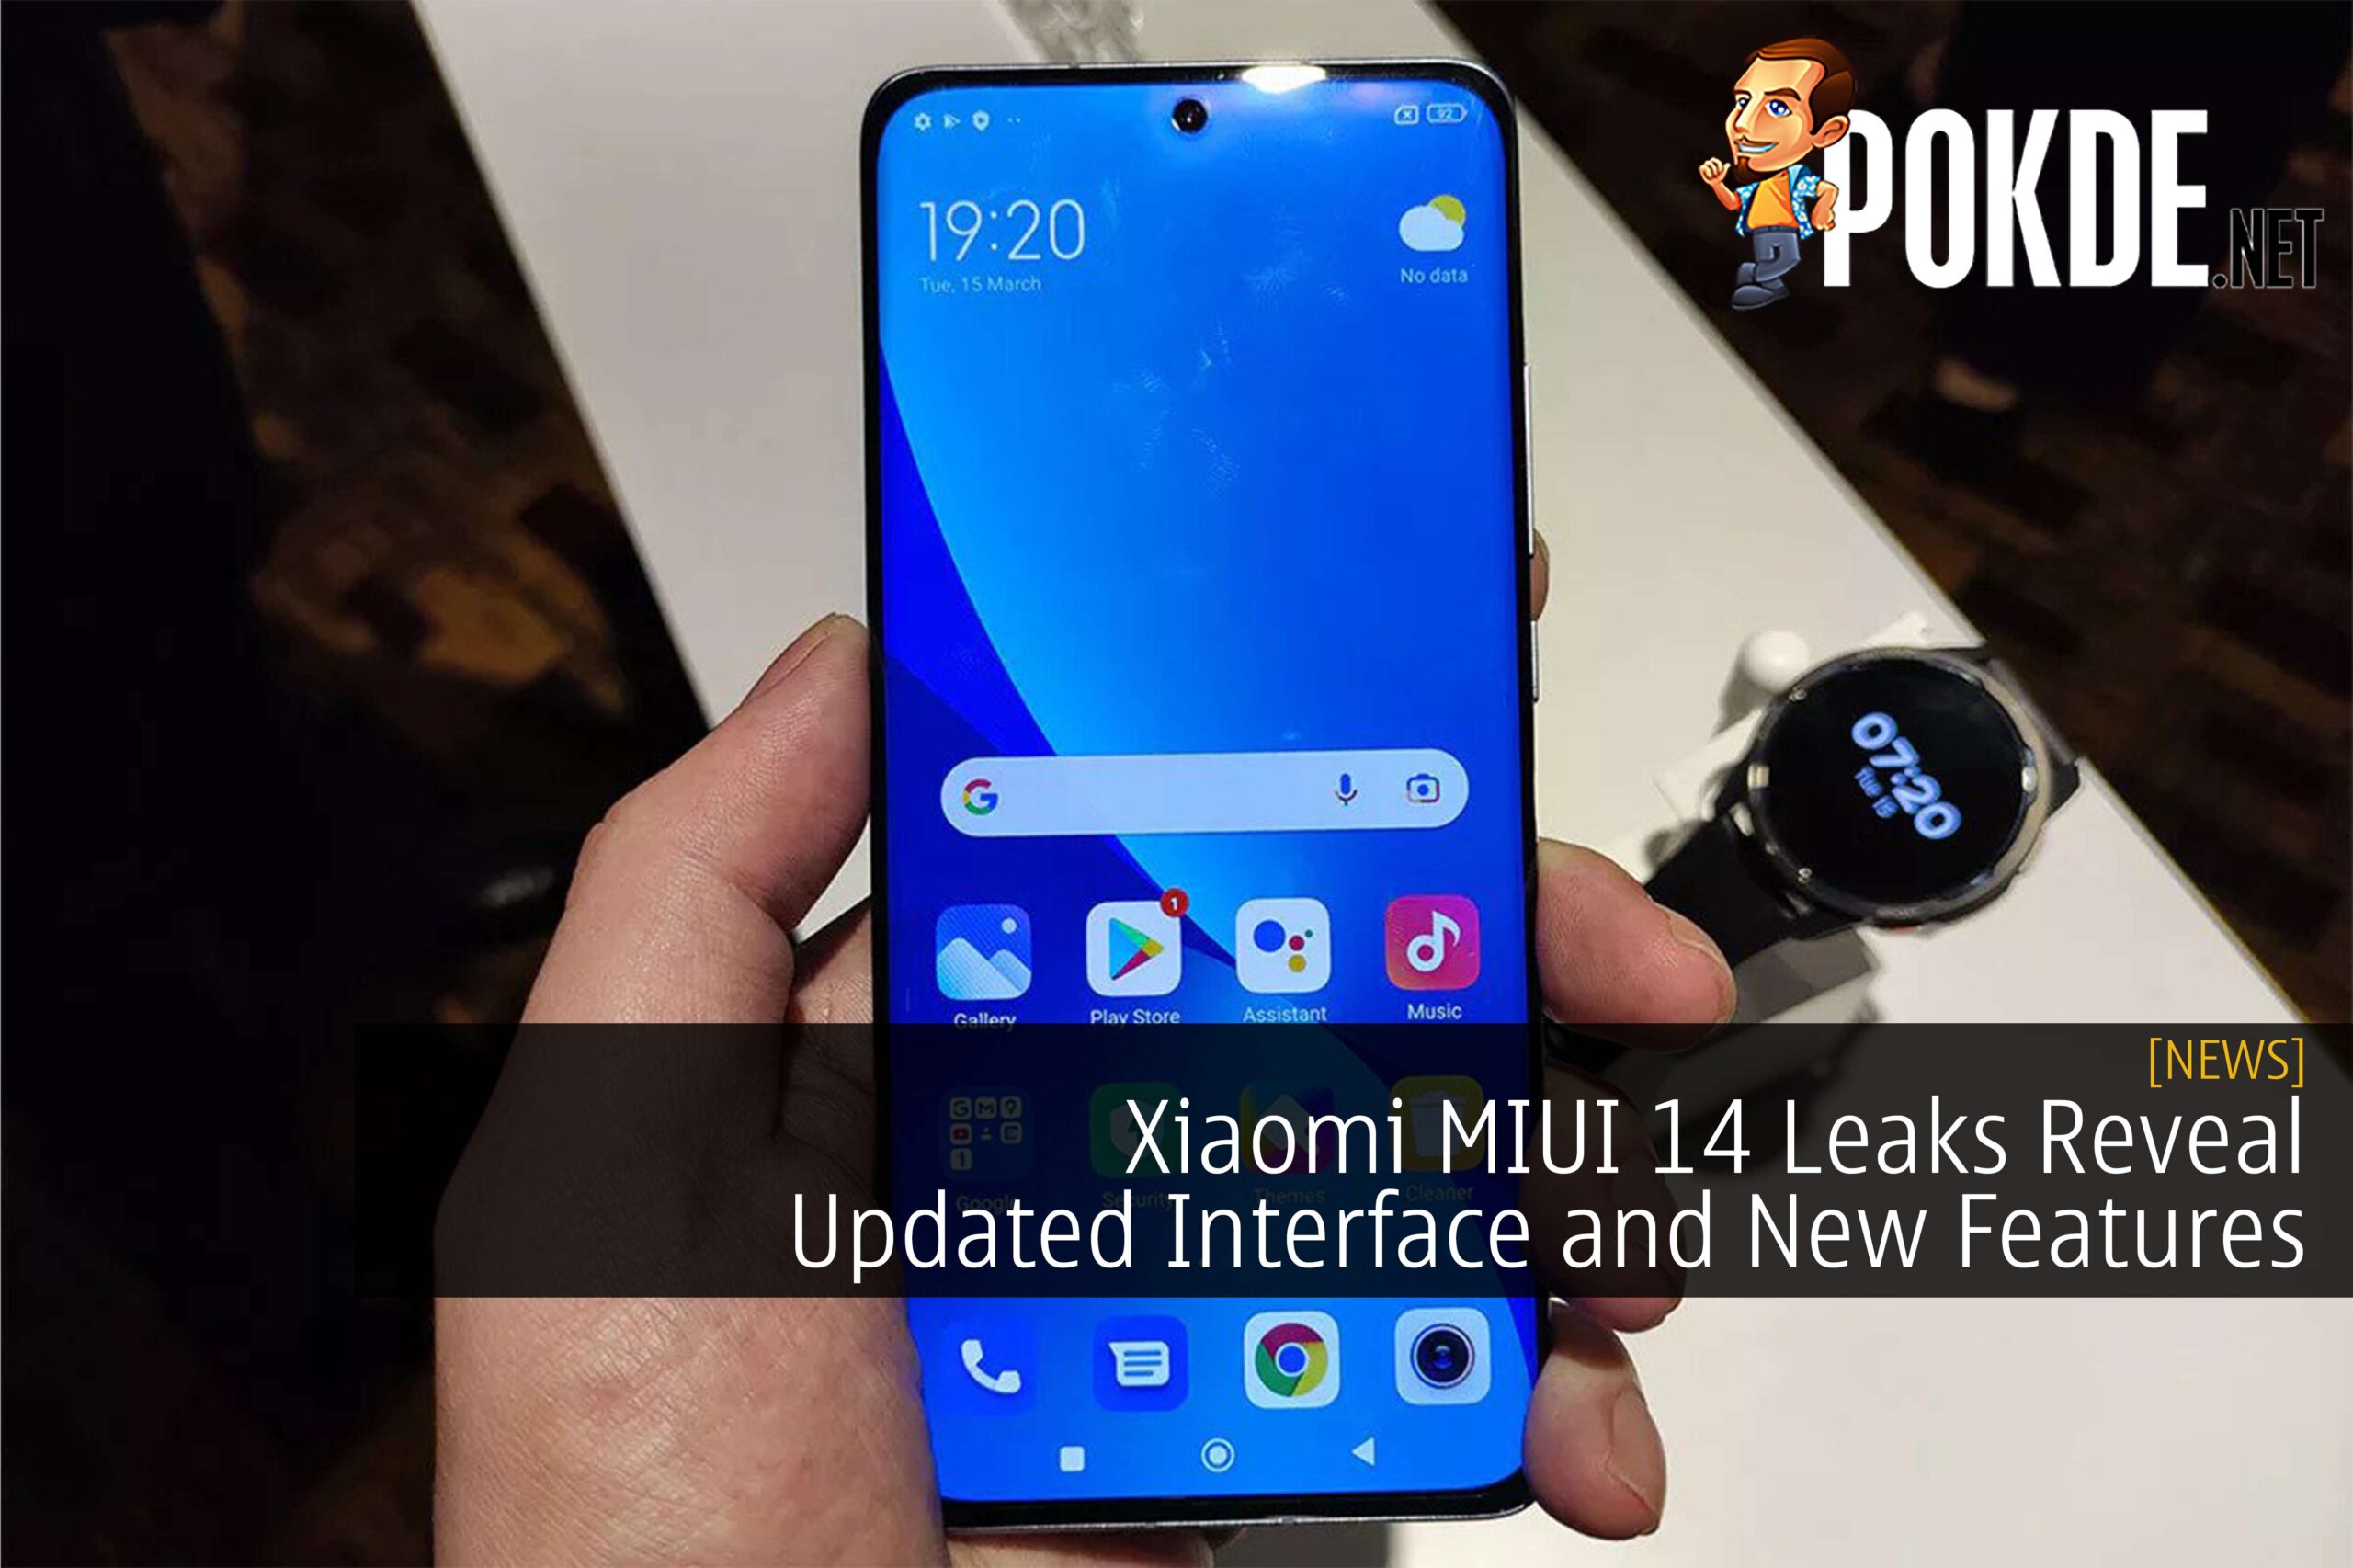 Xiaomi MIUI 14 Leaks Reveal Updated Interface and New Features